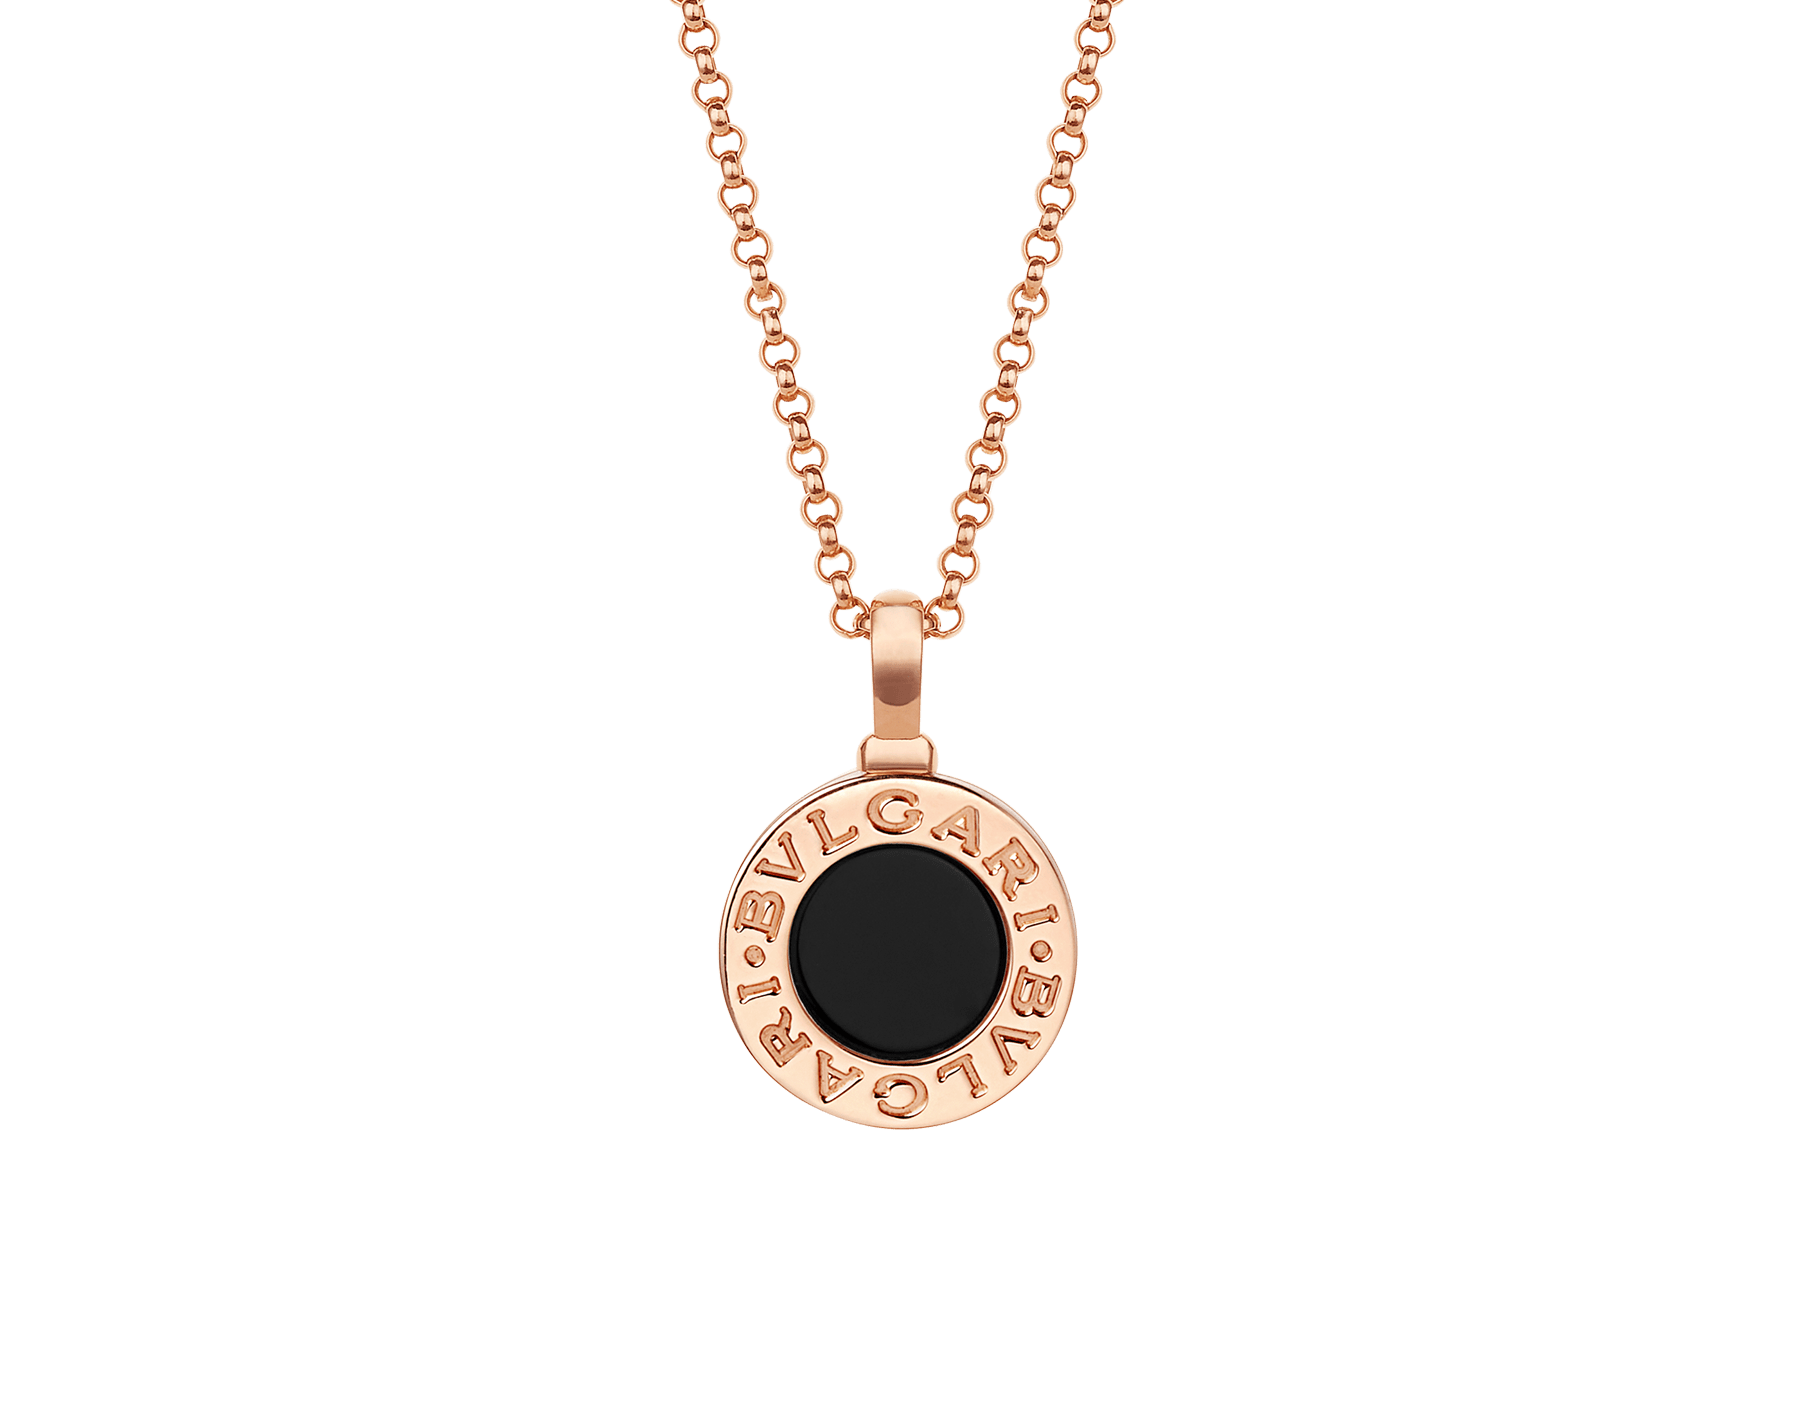 BULGARI BULGARI 18 kt rose gold necklace set with black onyx insert on the pendant and customisable with engraving on the back 359320 image 1